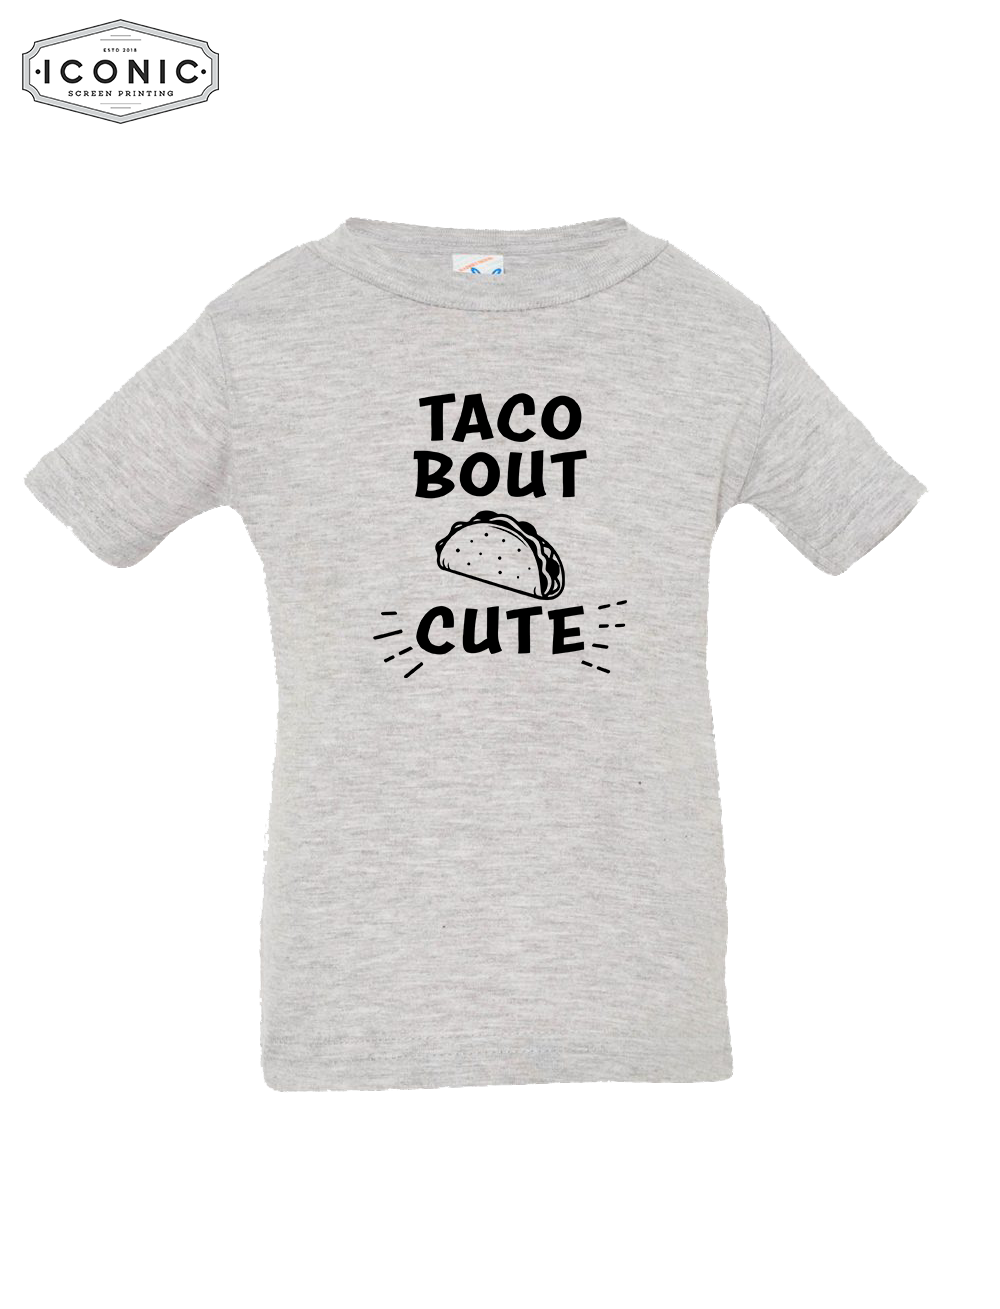 Tacobout Cute! - Infant Fine Jersey Tee